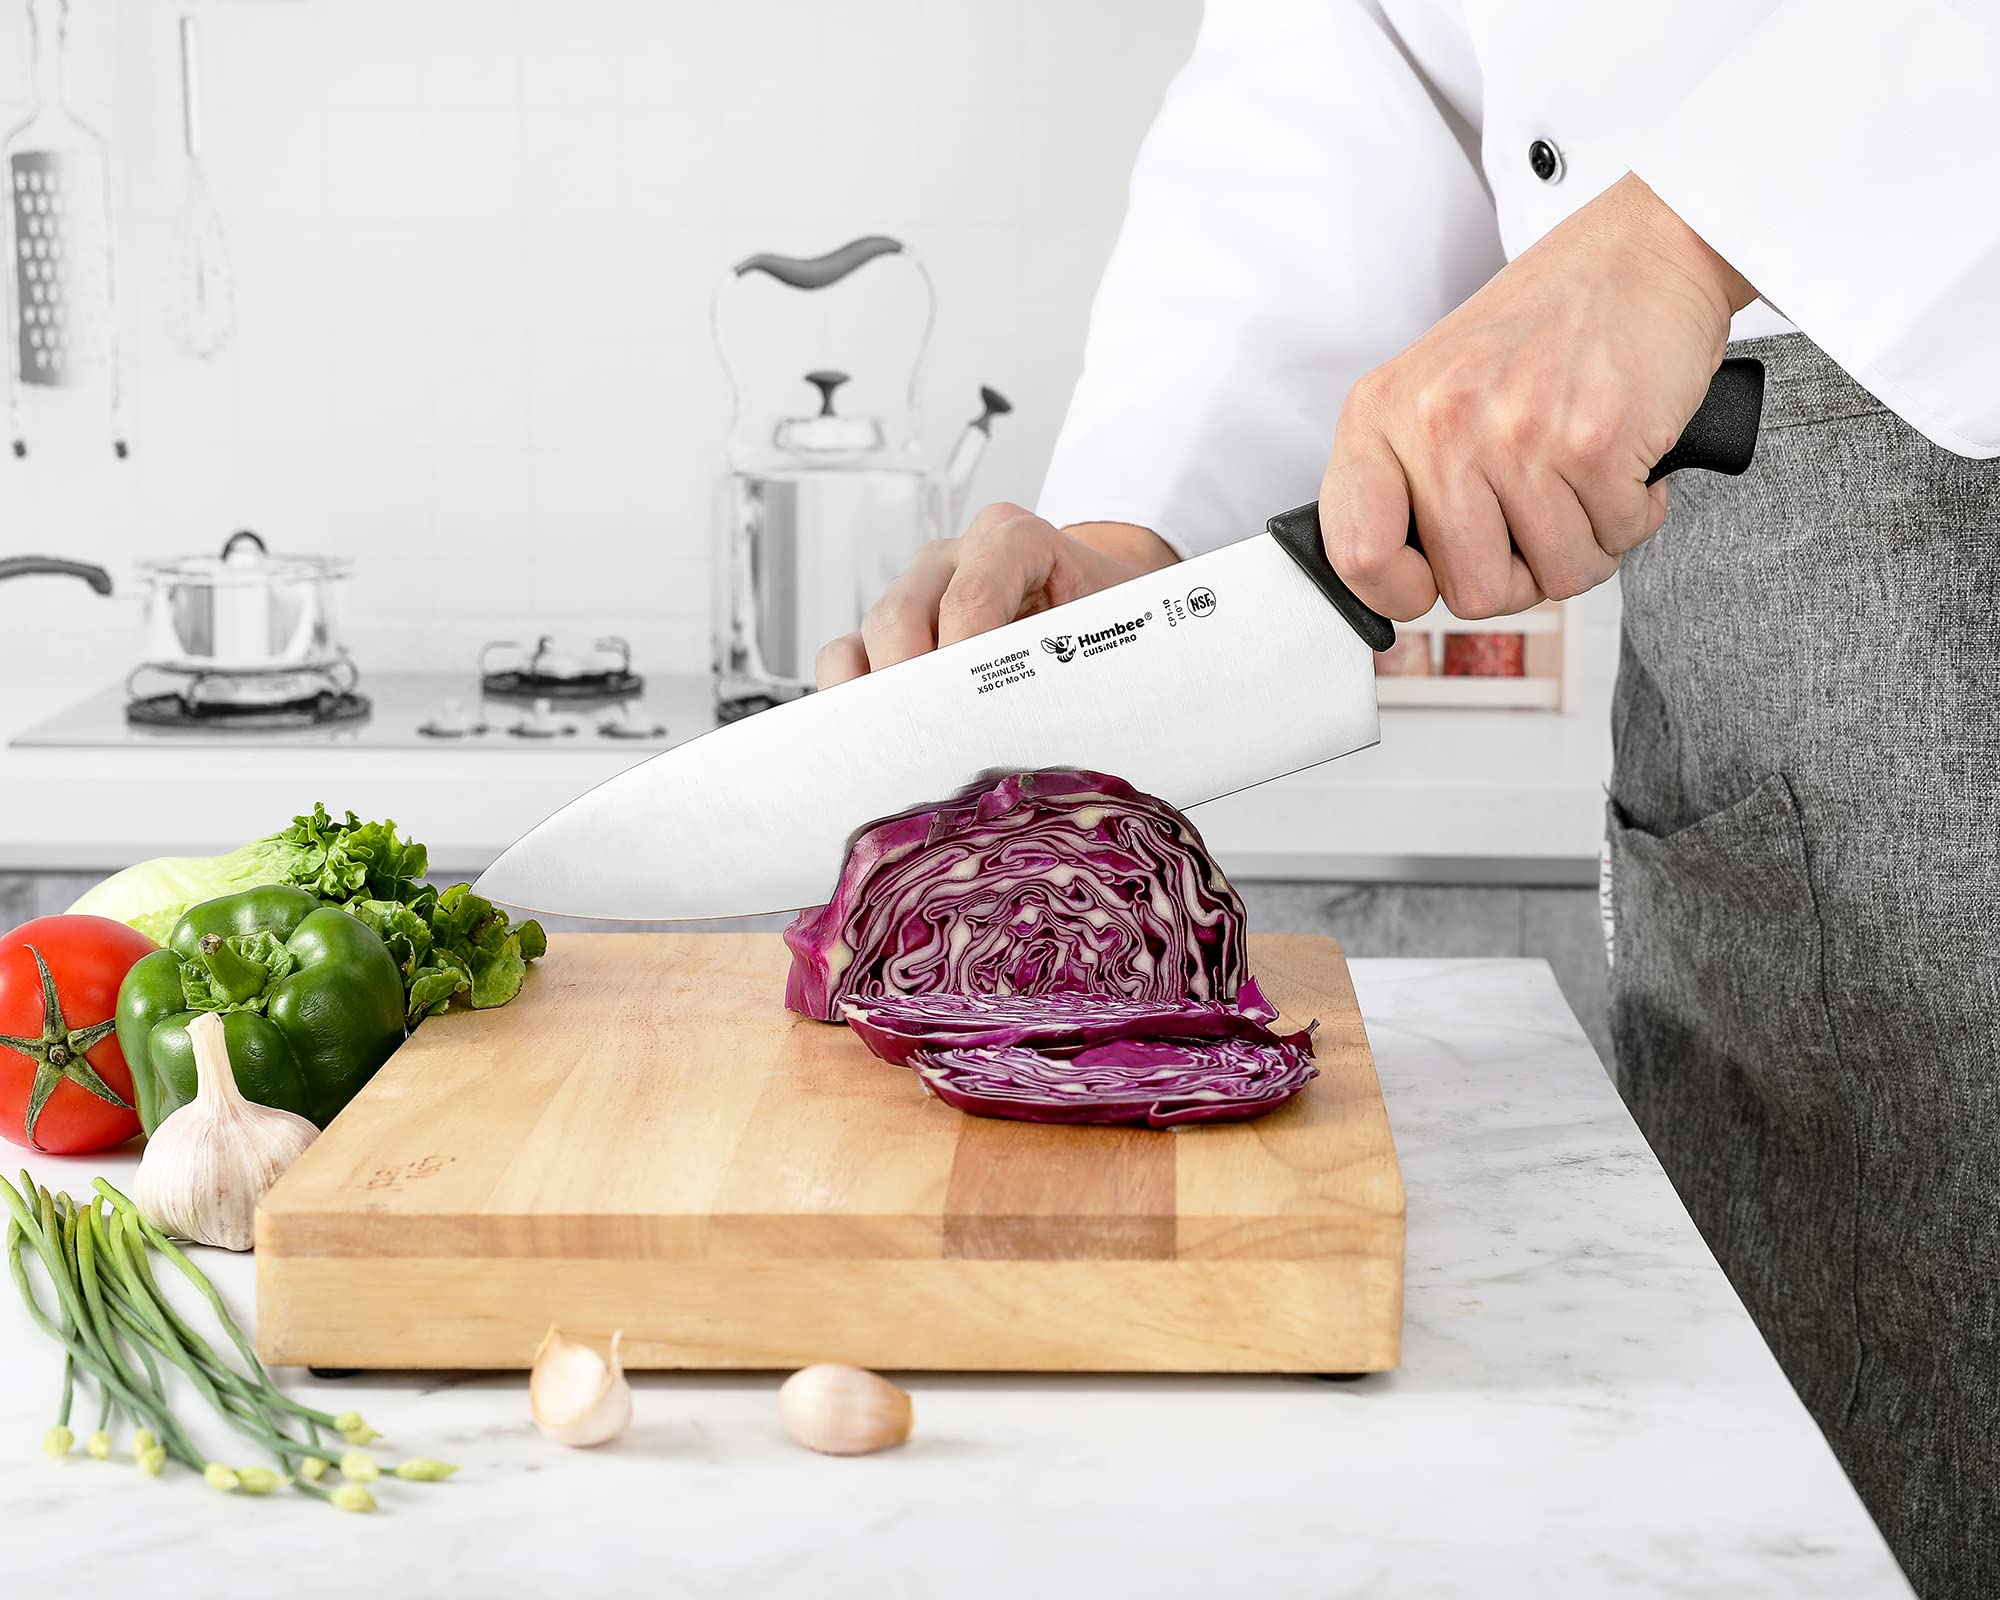 HUMBEE Chef Knife 10 Inch - High Carbon Stainless Steel, Ultra-sharp Chef’s Knife NSF Certified